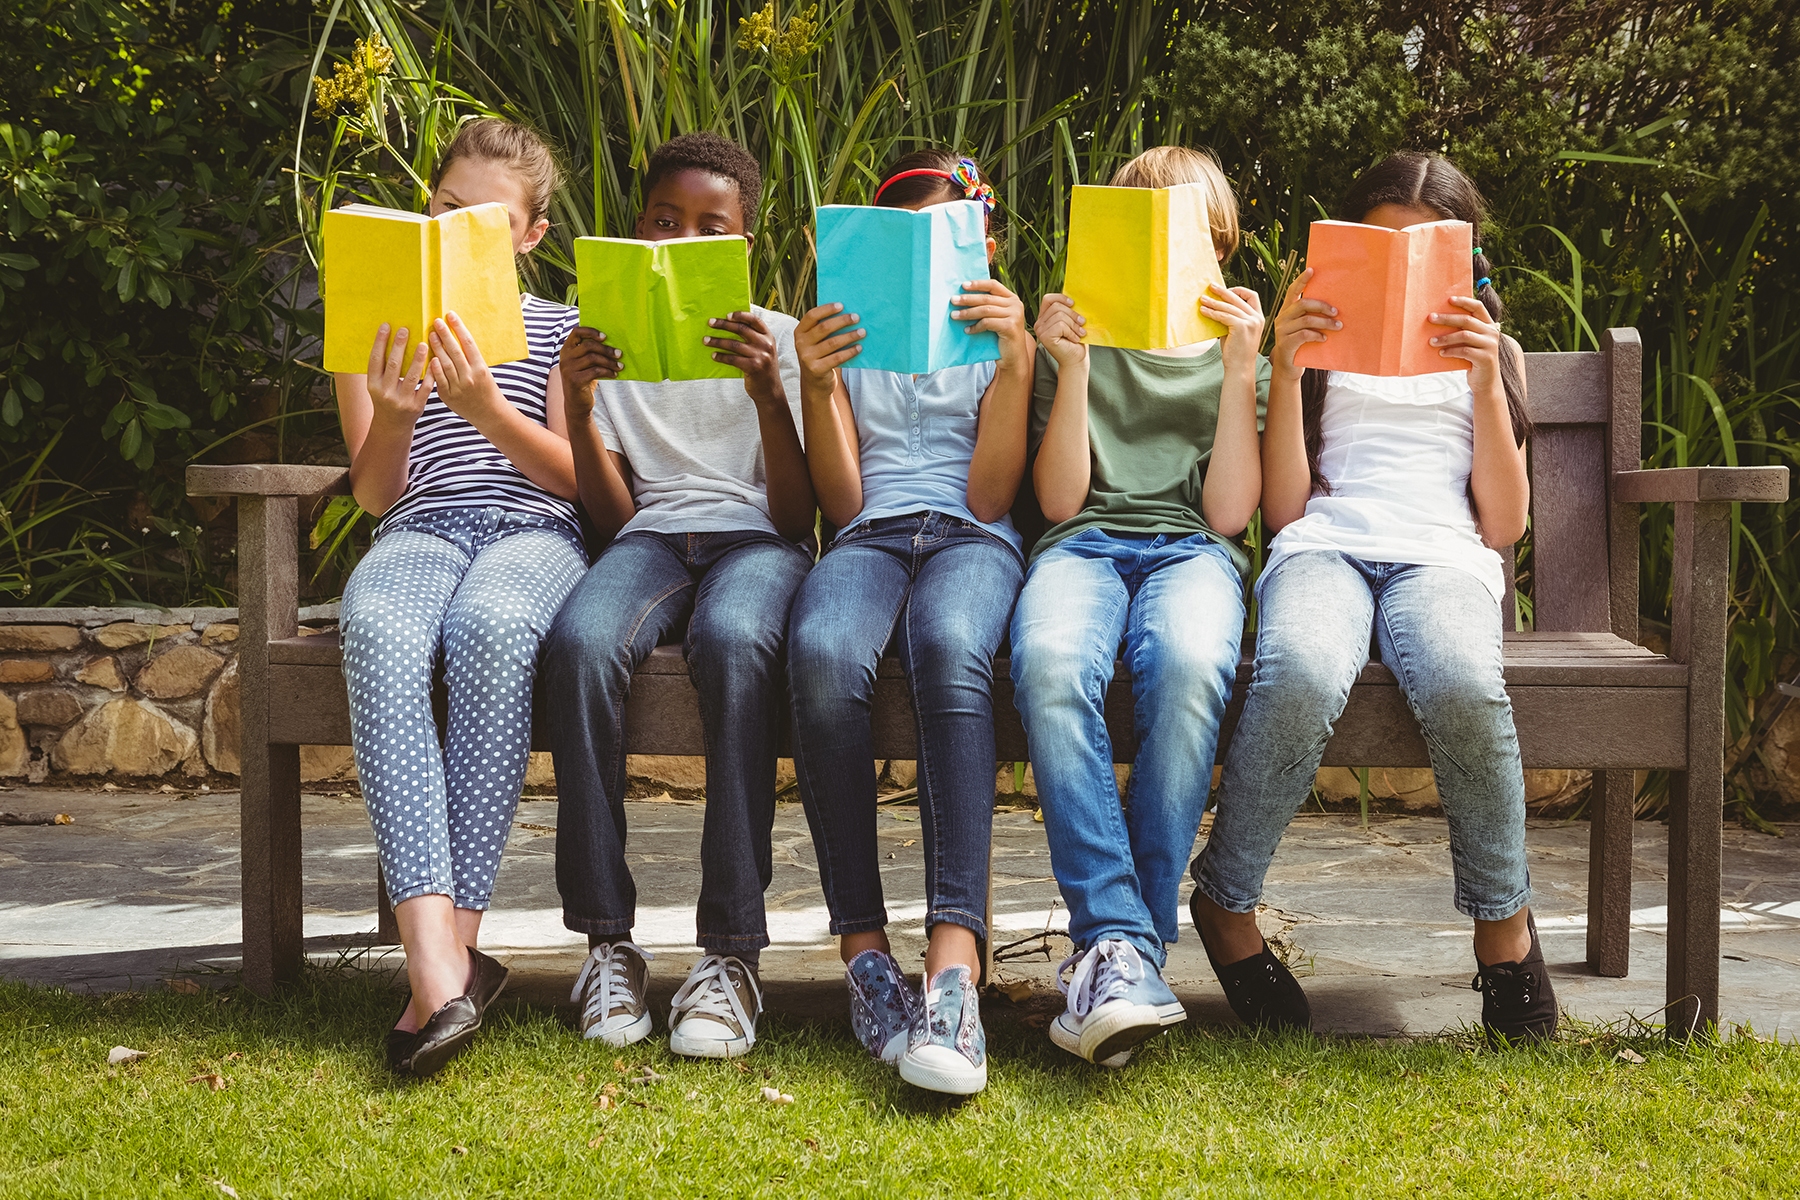 A photo of five children, a mixture of boys and girls, all sitting on a bench in the park, holding up books that cover their faces